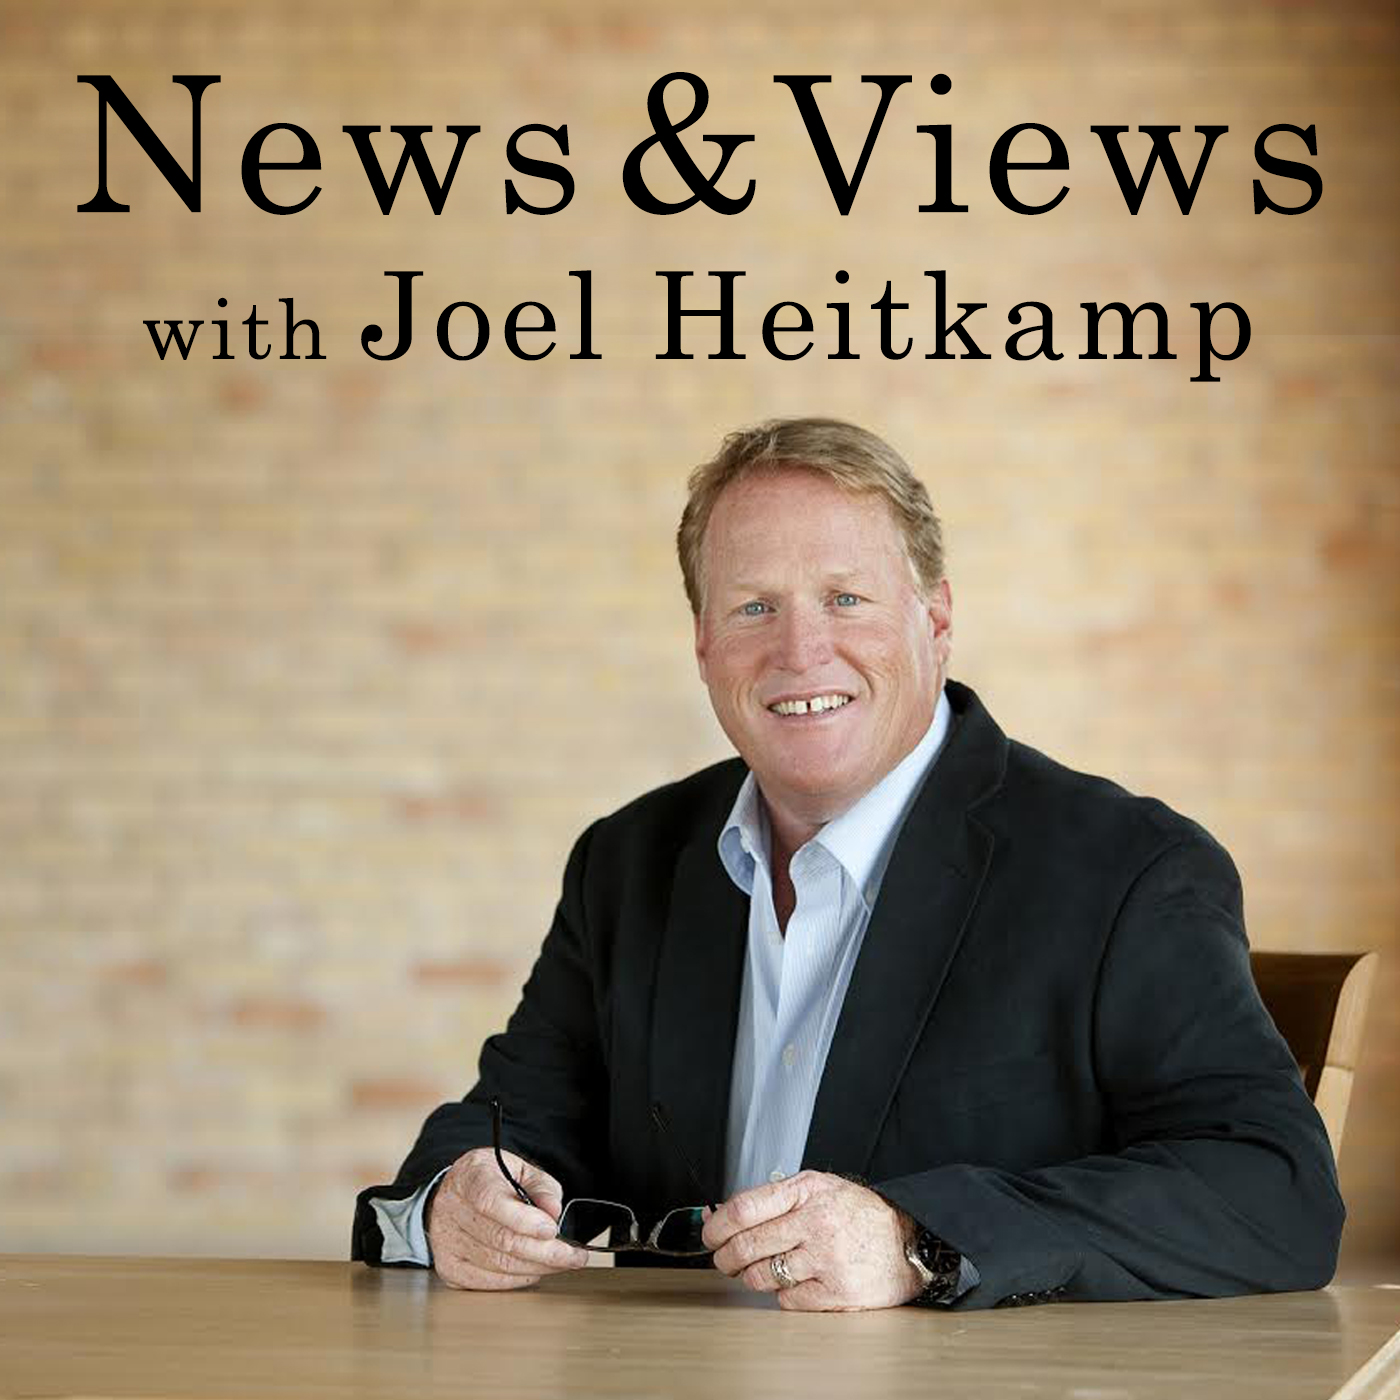 Joel Heitkamp and Jack Zaleski share their thoughts on the Congressional debate